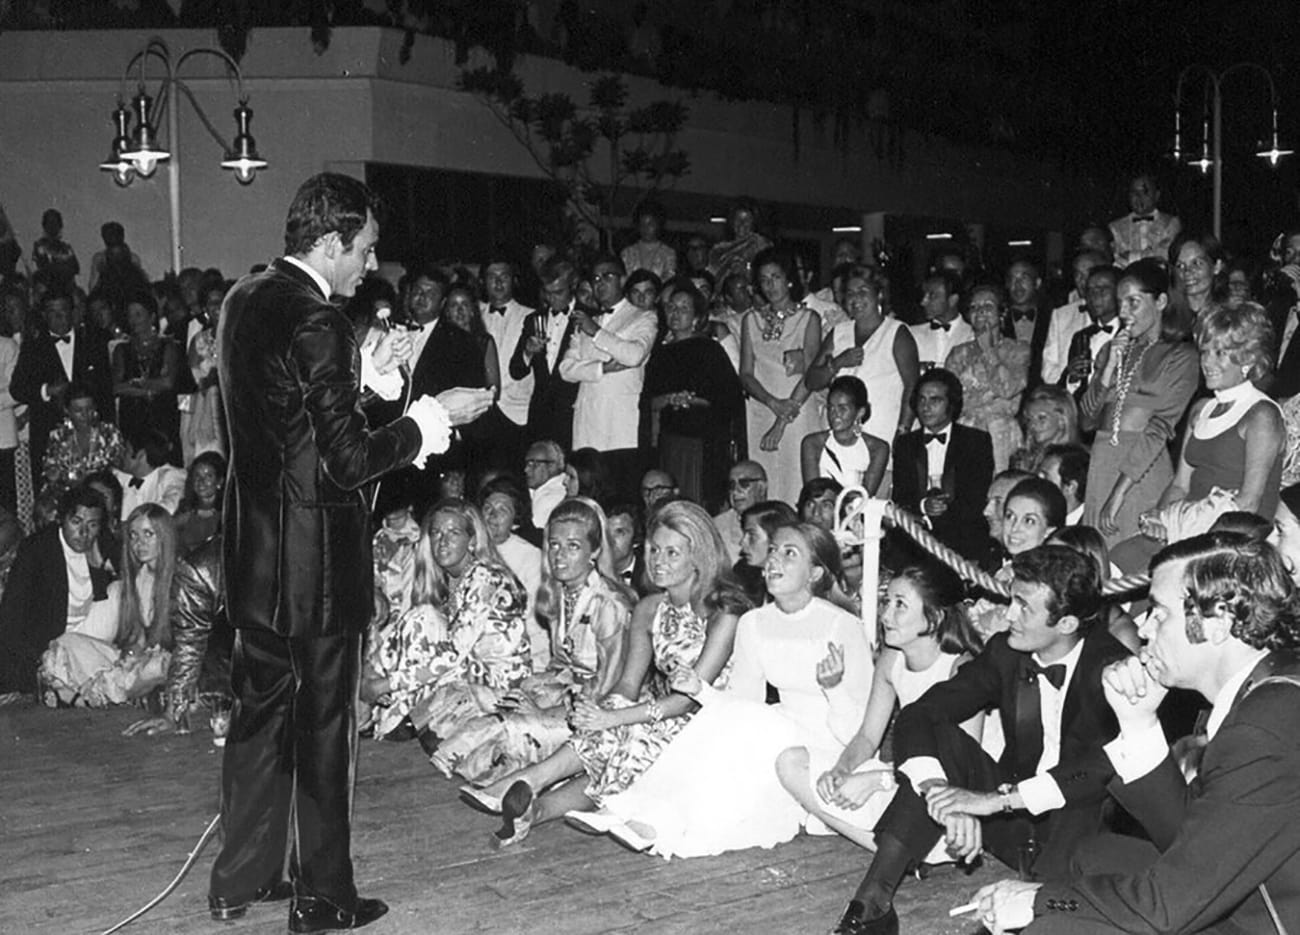 Puerto Banús A very young Julio Iglesias provided the entertainment at the inauguration party